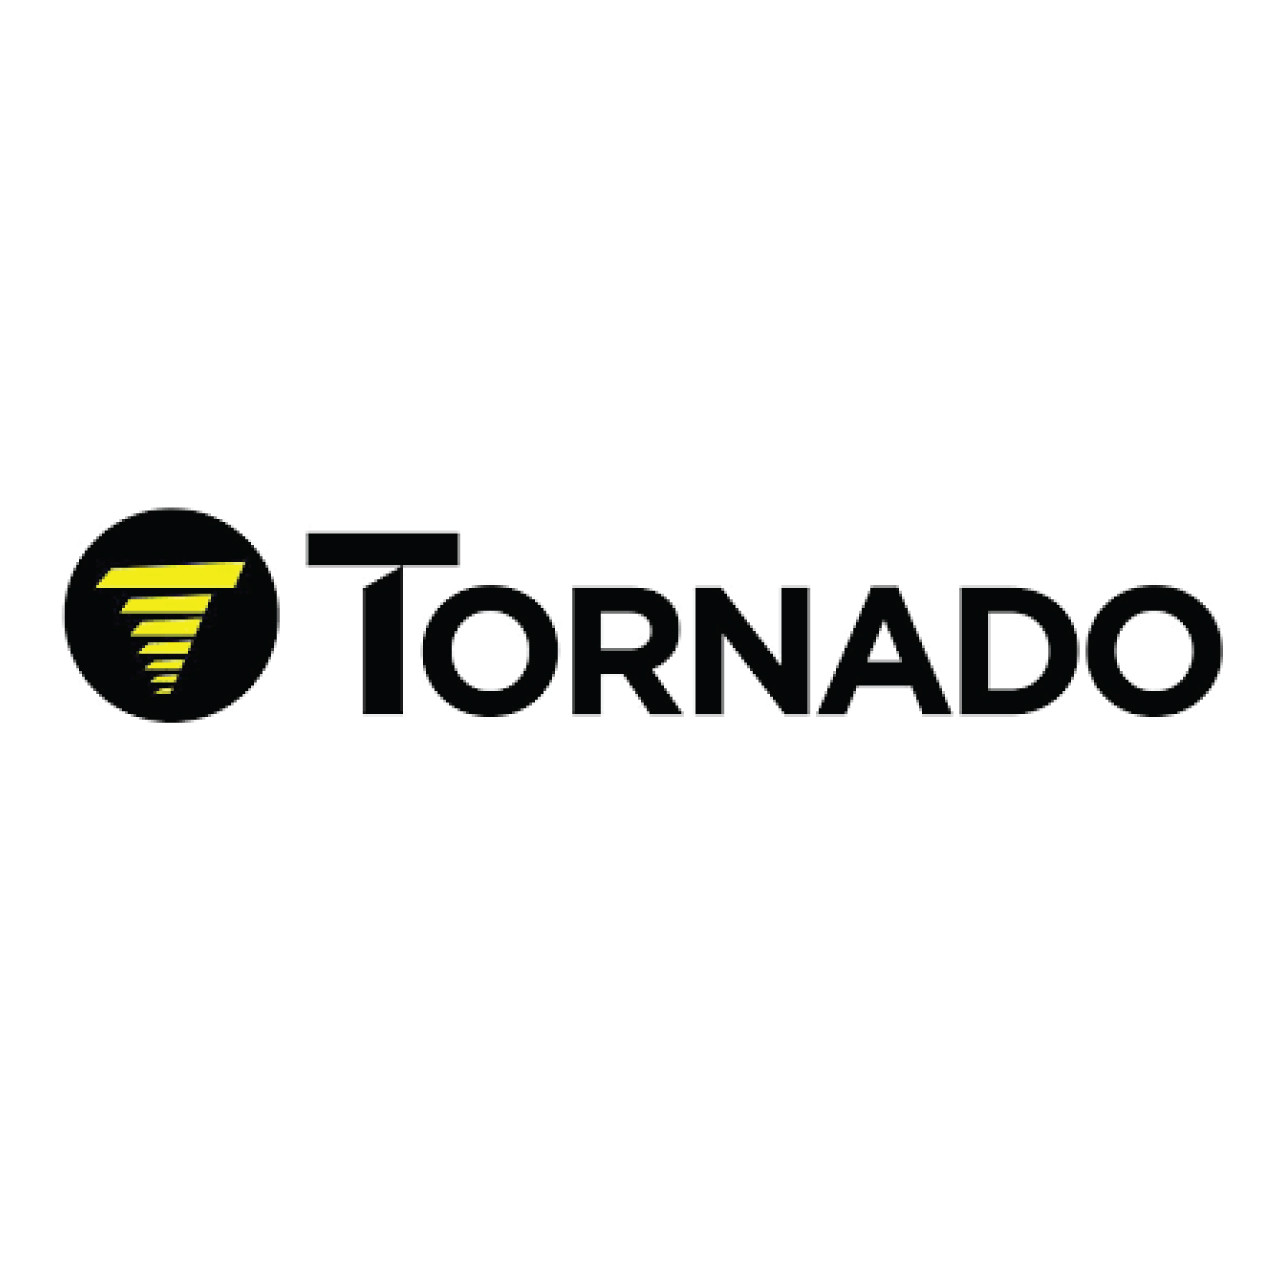 Tornado 3AH002 - POP OUT 1 GALLON CONTAINER GALLON ONLY...GALLON ONLY pic